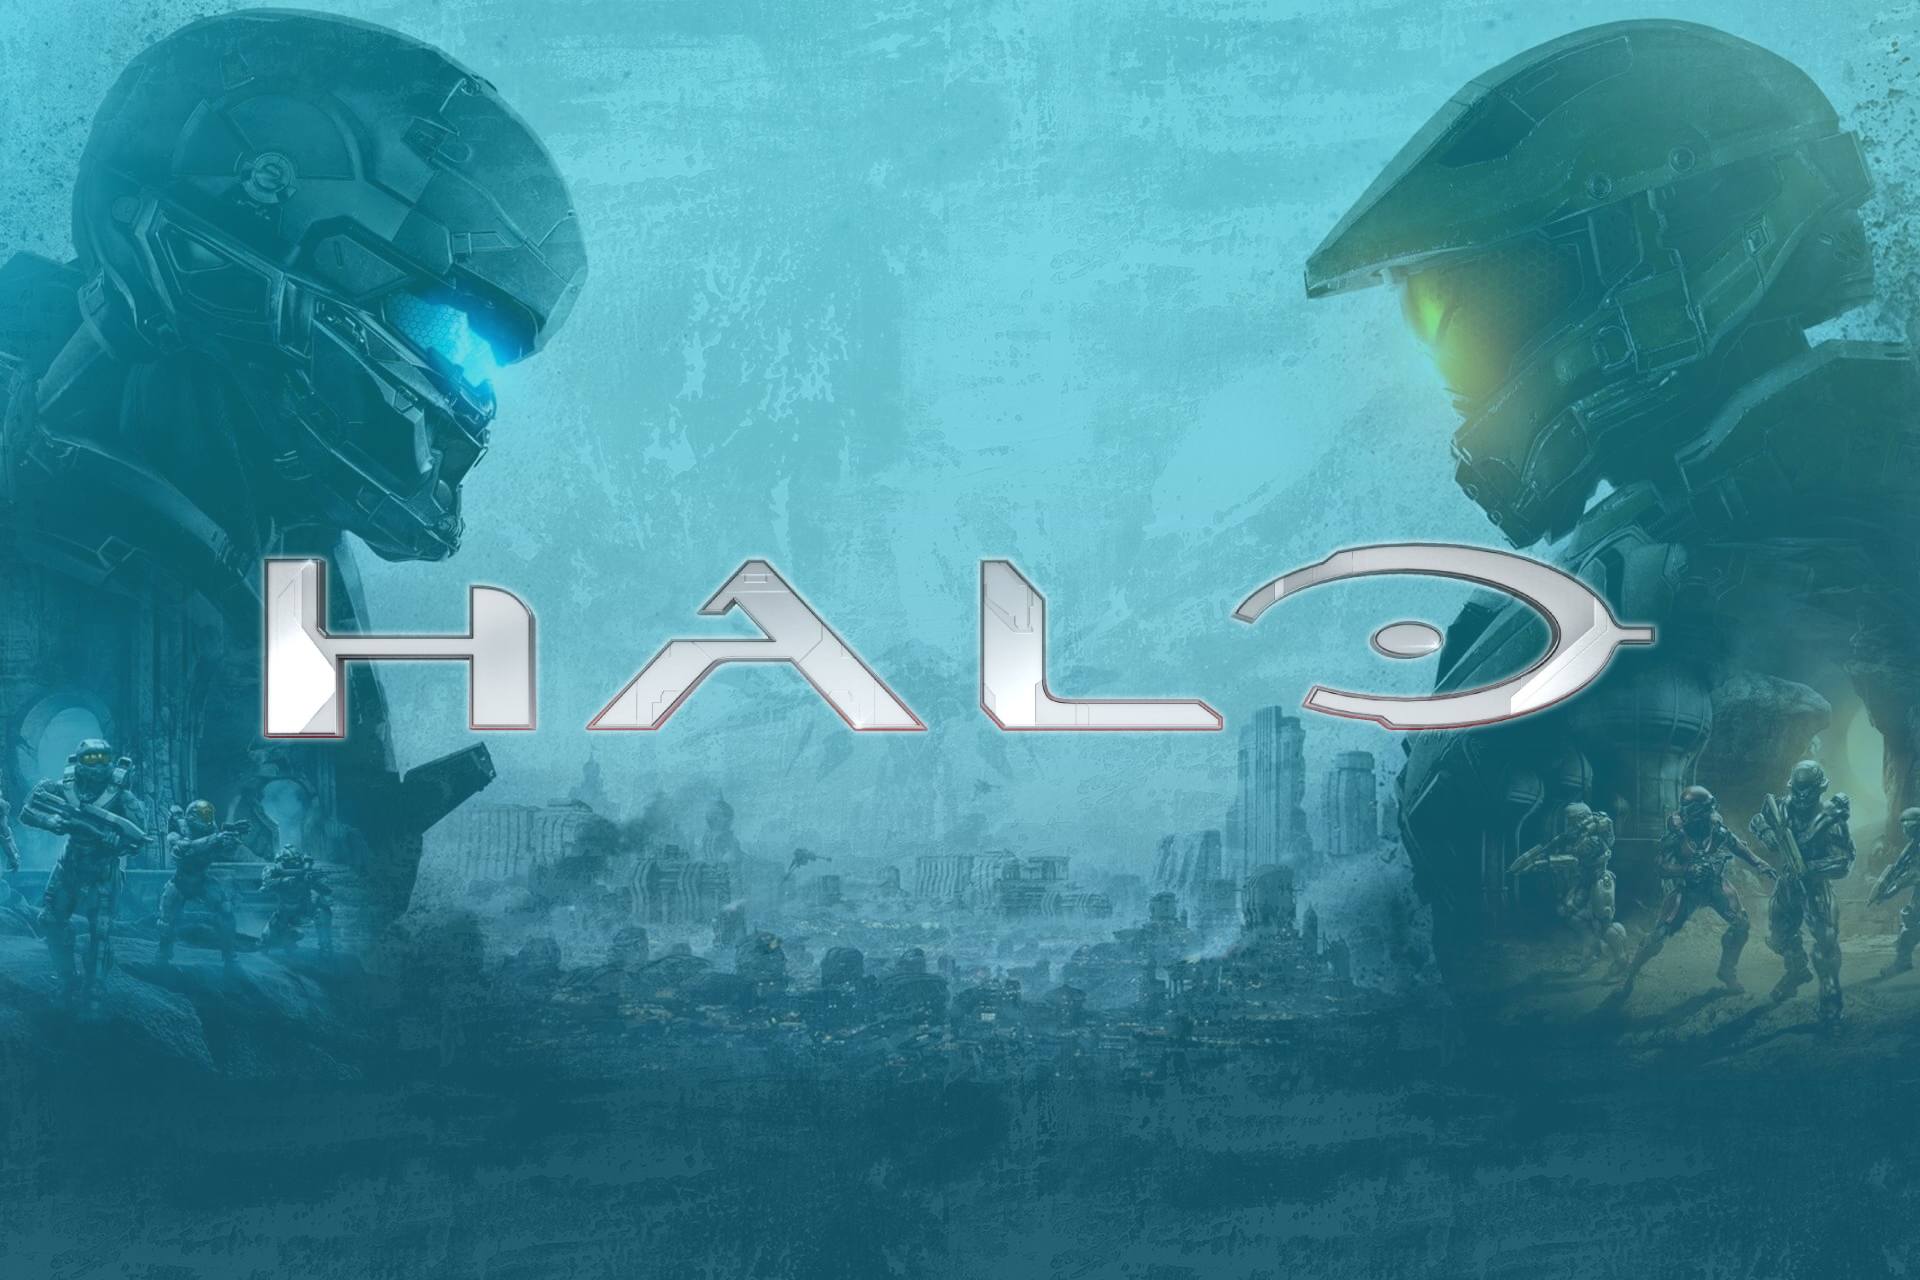 How to fix Halo: The Master Chief Collection not launching on PC